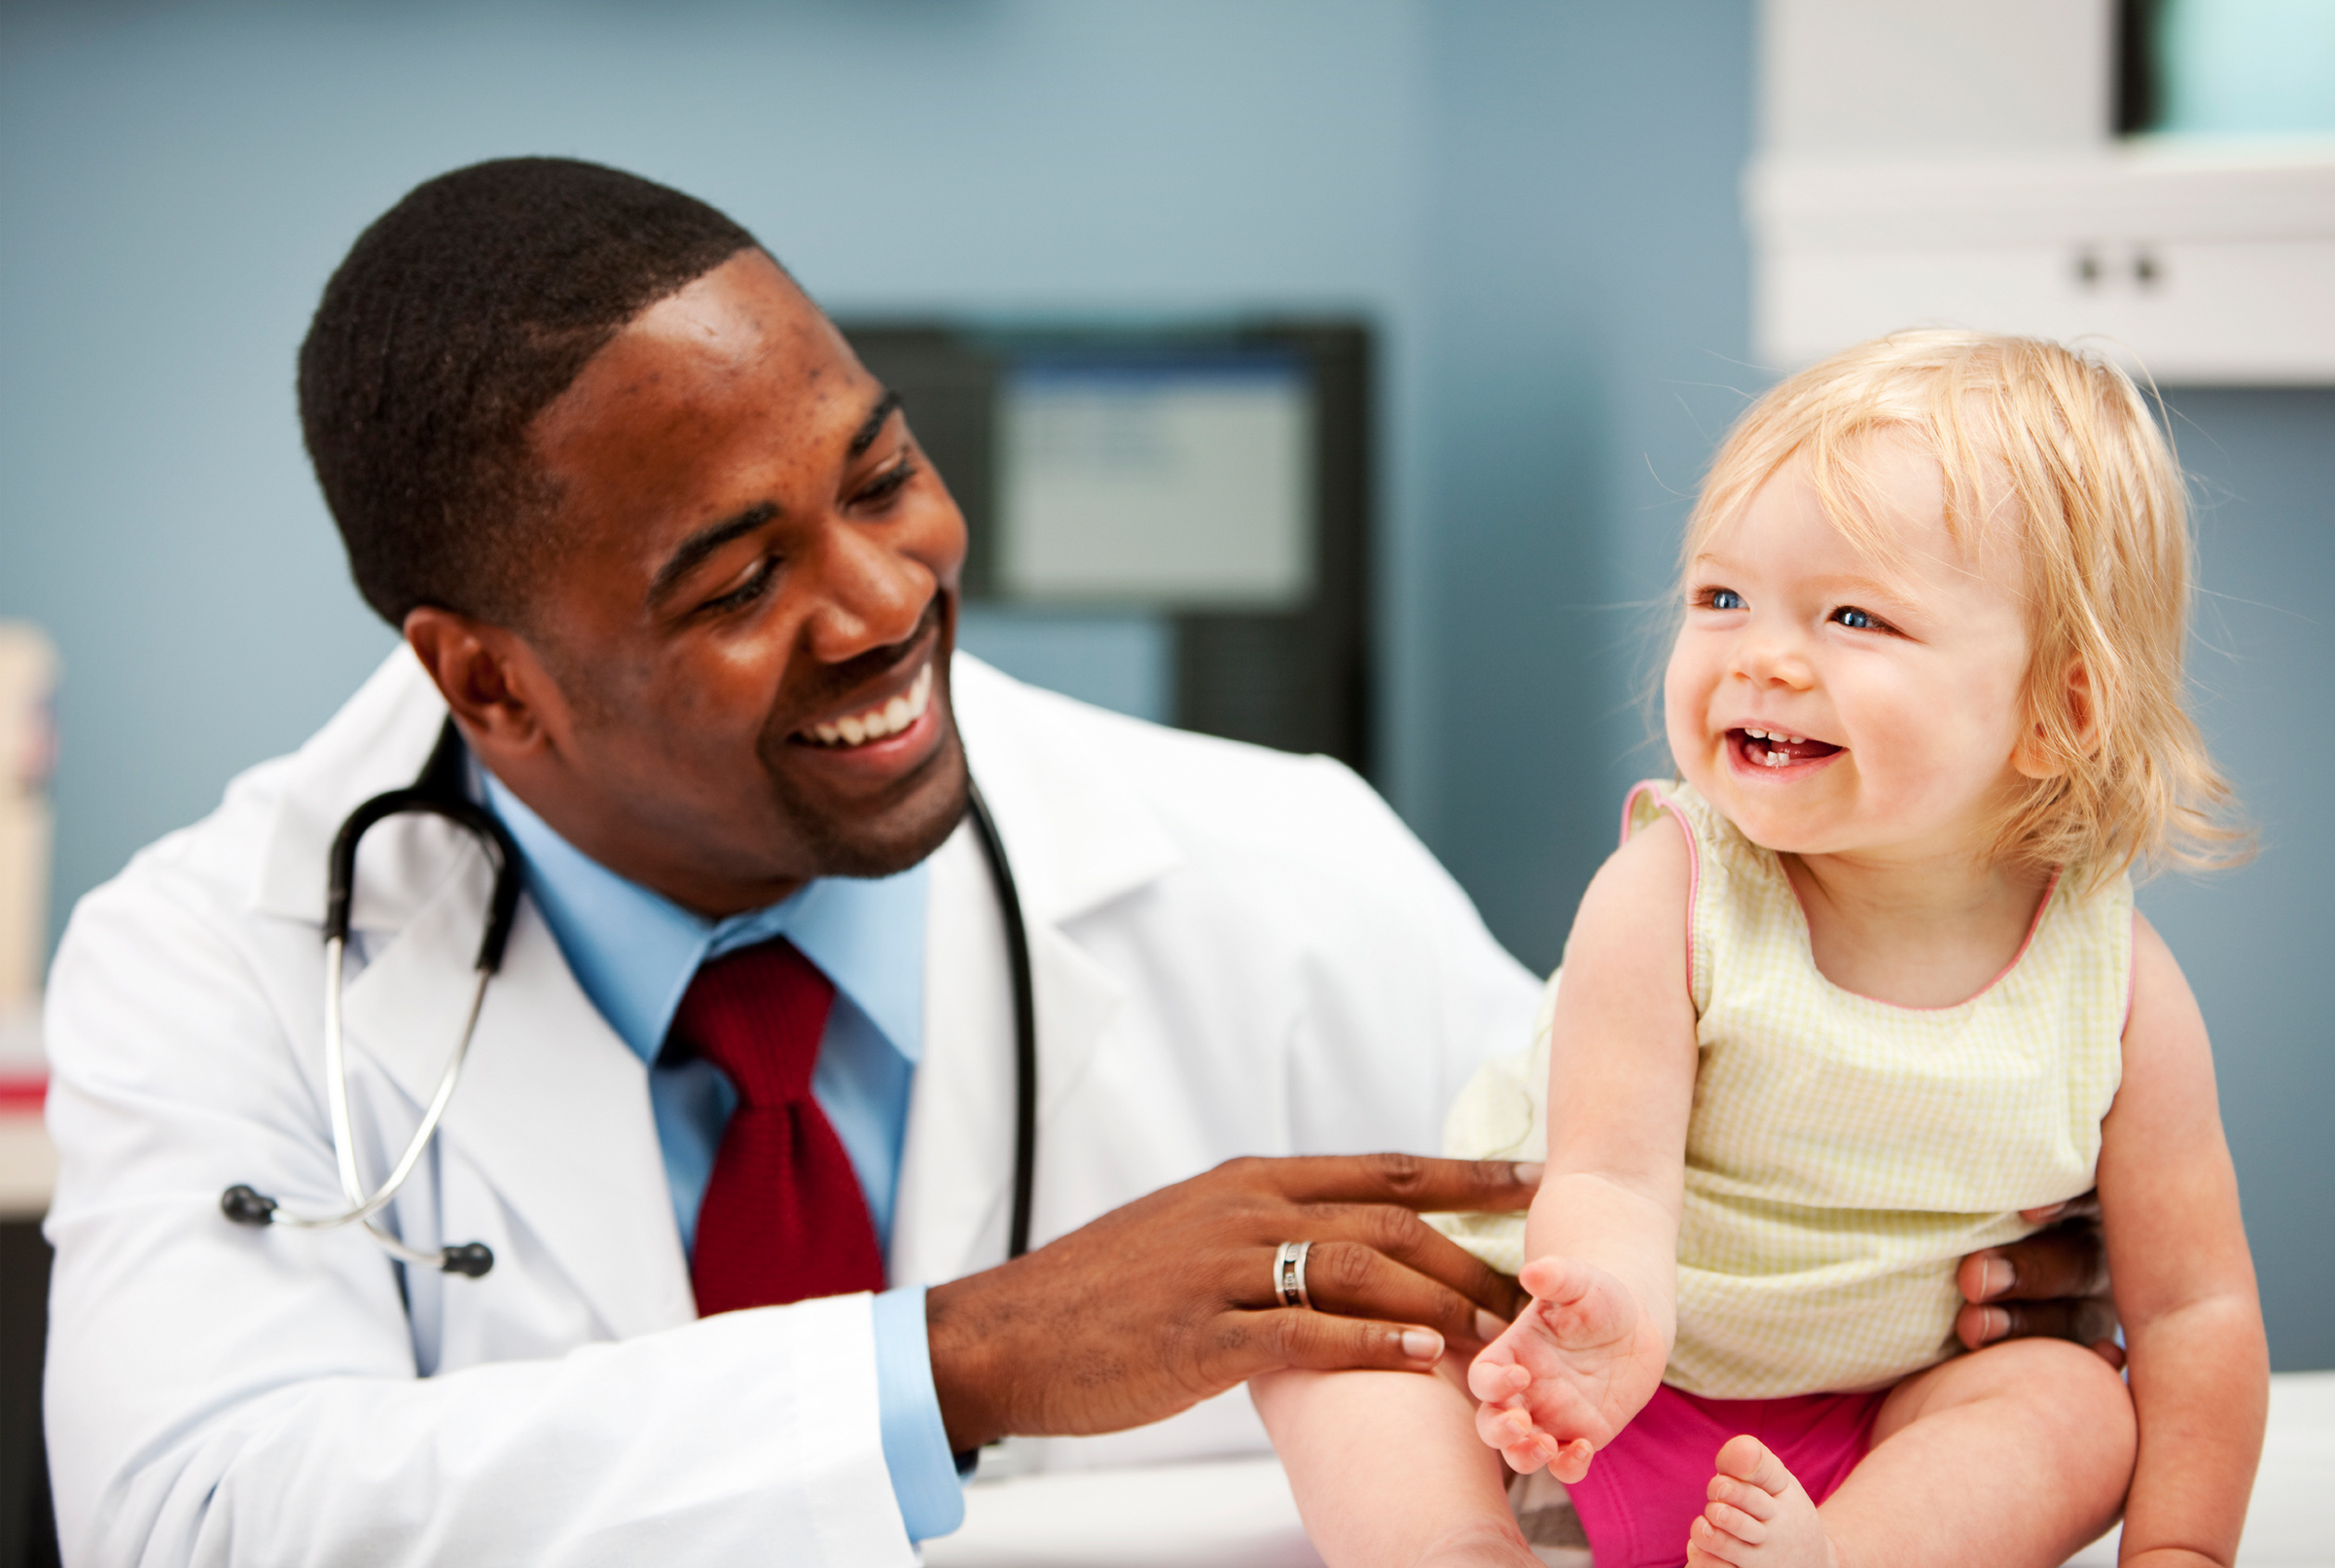 success story - male doctor examining female toddler, both smiling